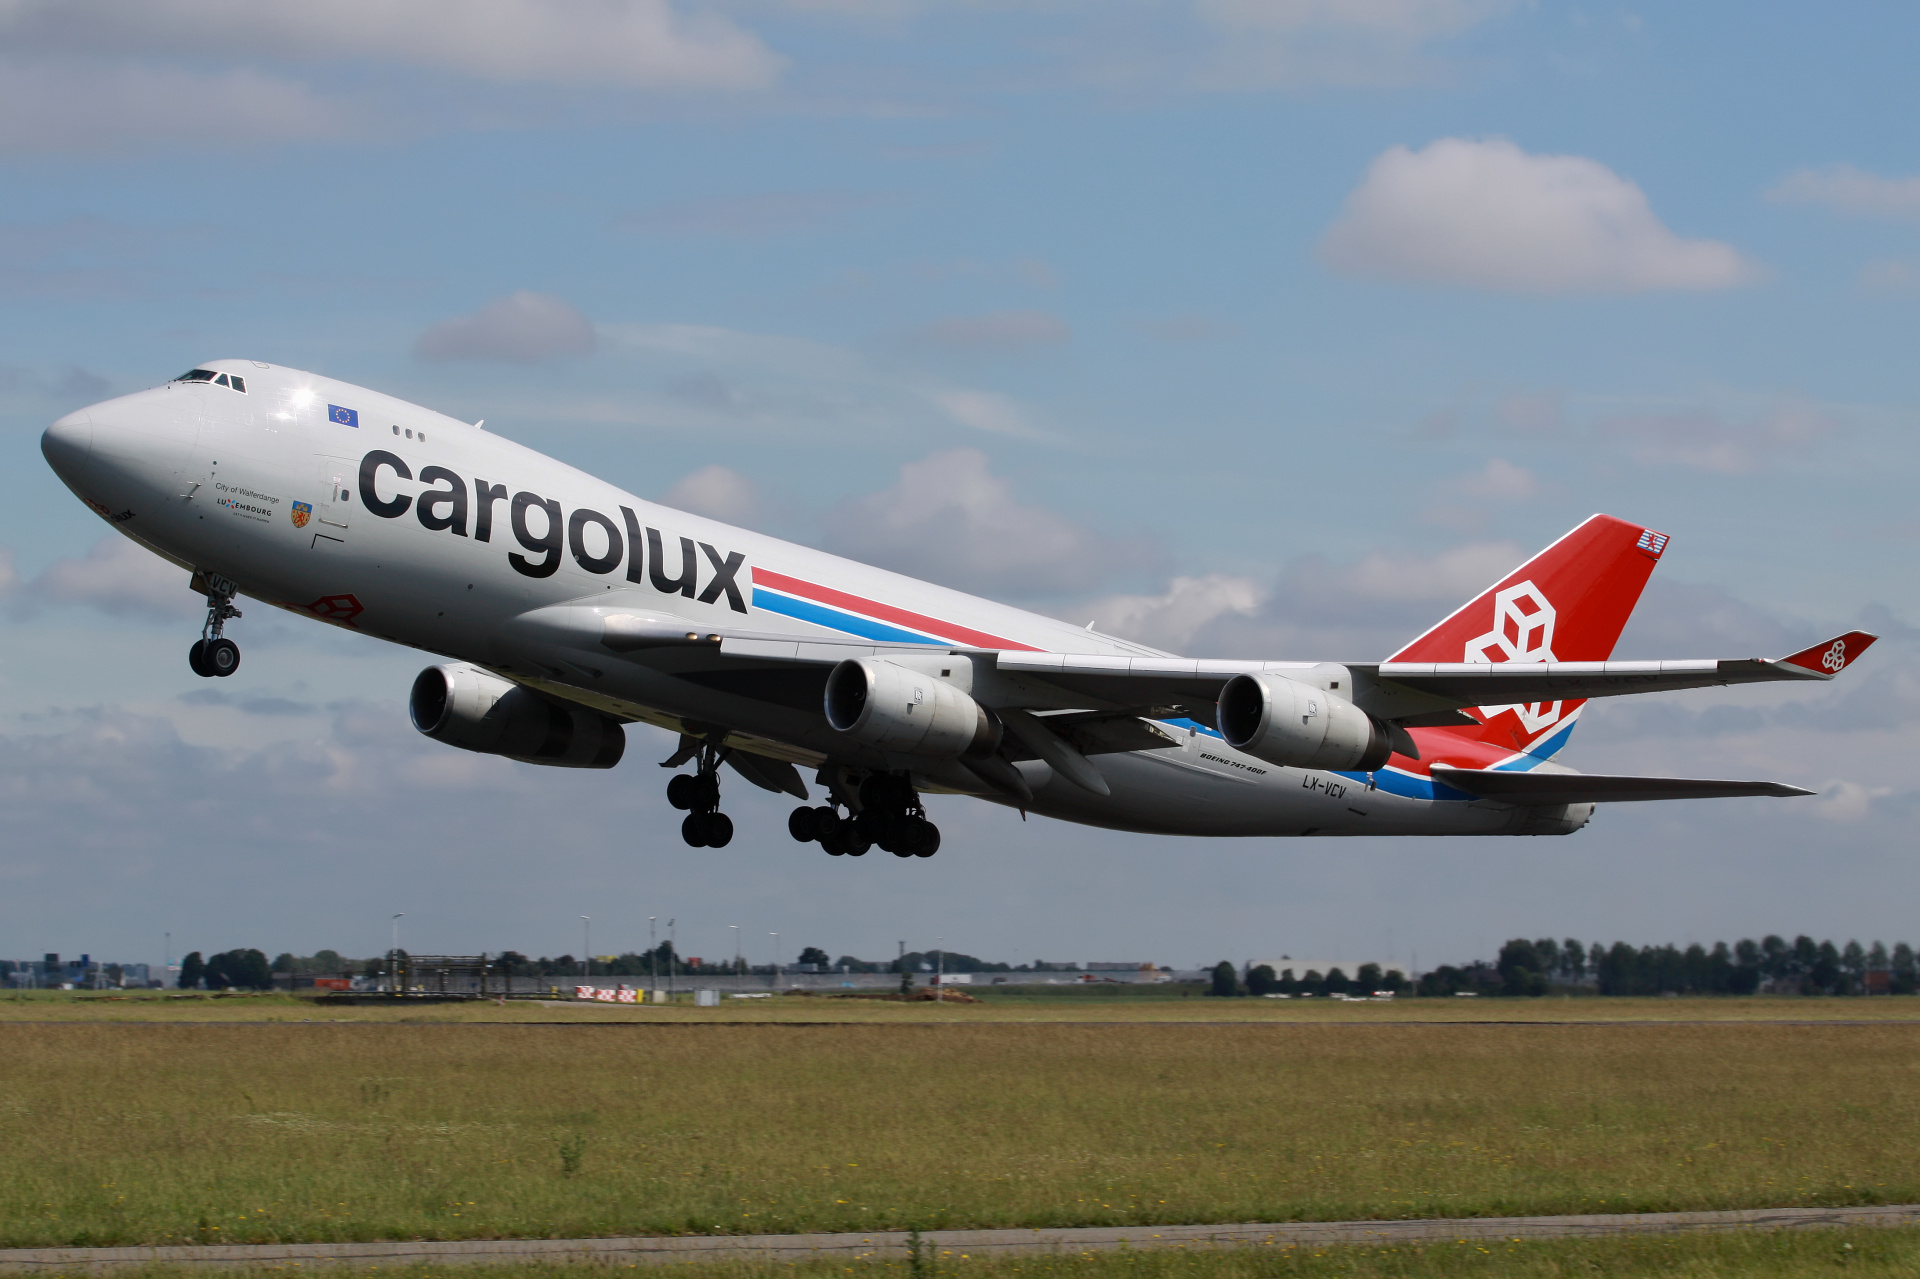 LX-VCV, Cargolux Airlines (Aircraft » Schiphol Spotting » Boeing 747-400F)